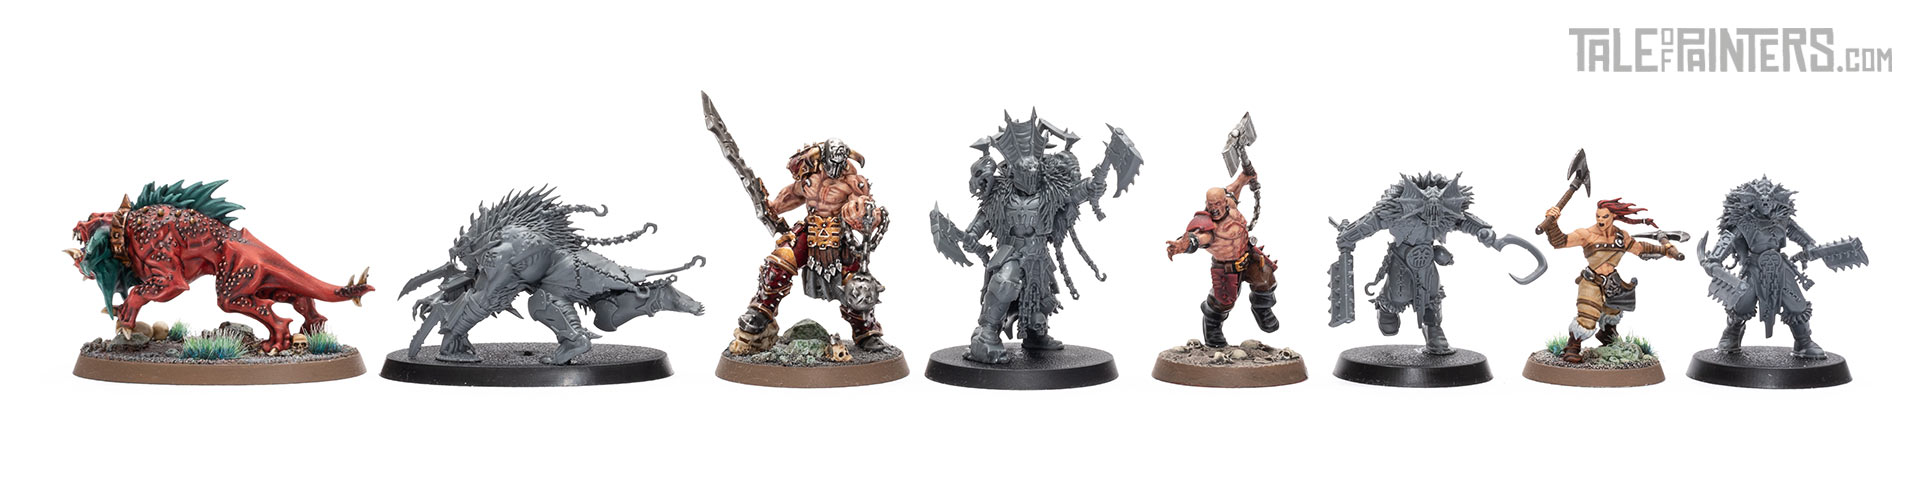 Scale / size comparison of the Claws of Kharanak with various Khorne miniatures